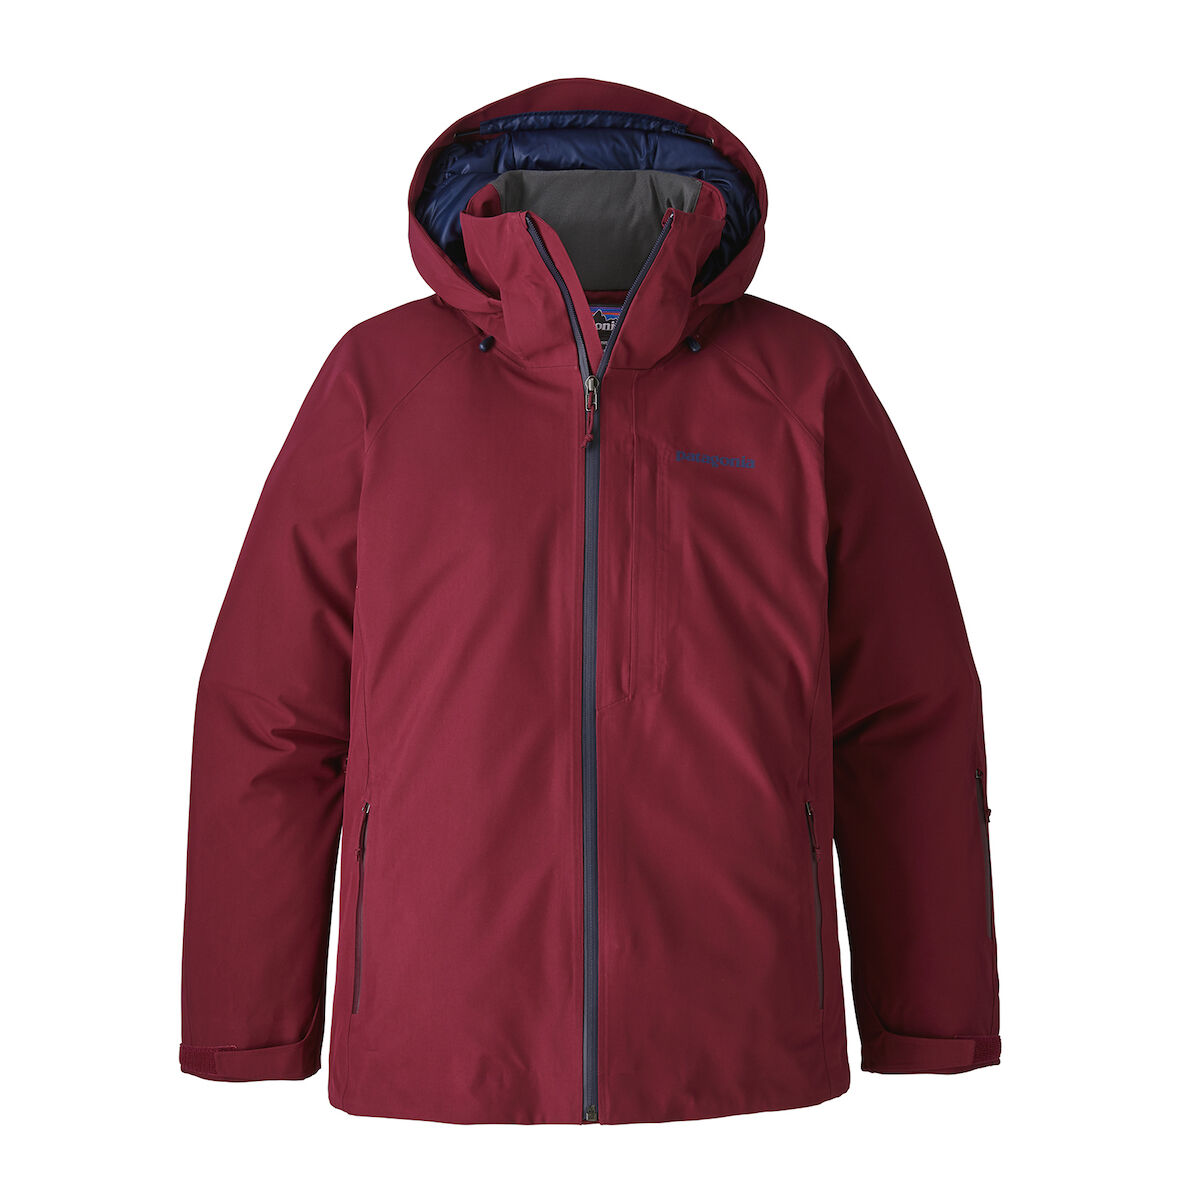 Patagonia - Insulated Powder Bowl Jkt - Chaqueta impermeable - Mujer